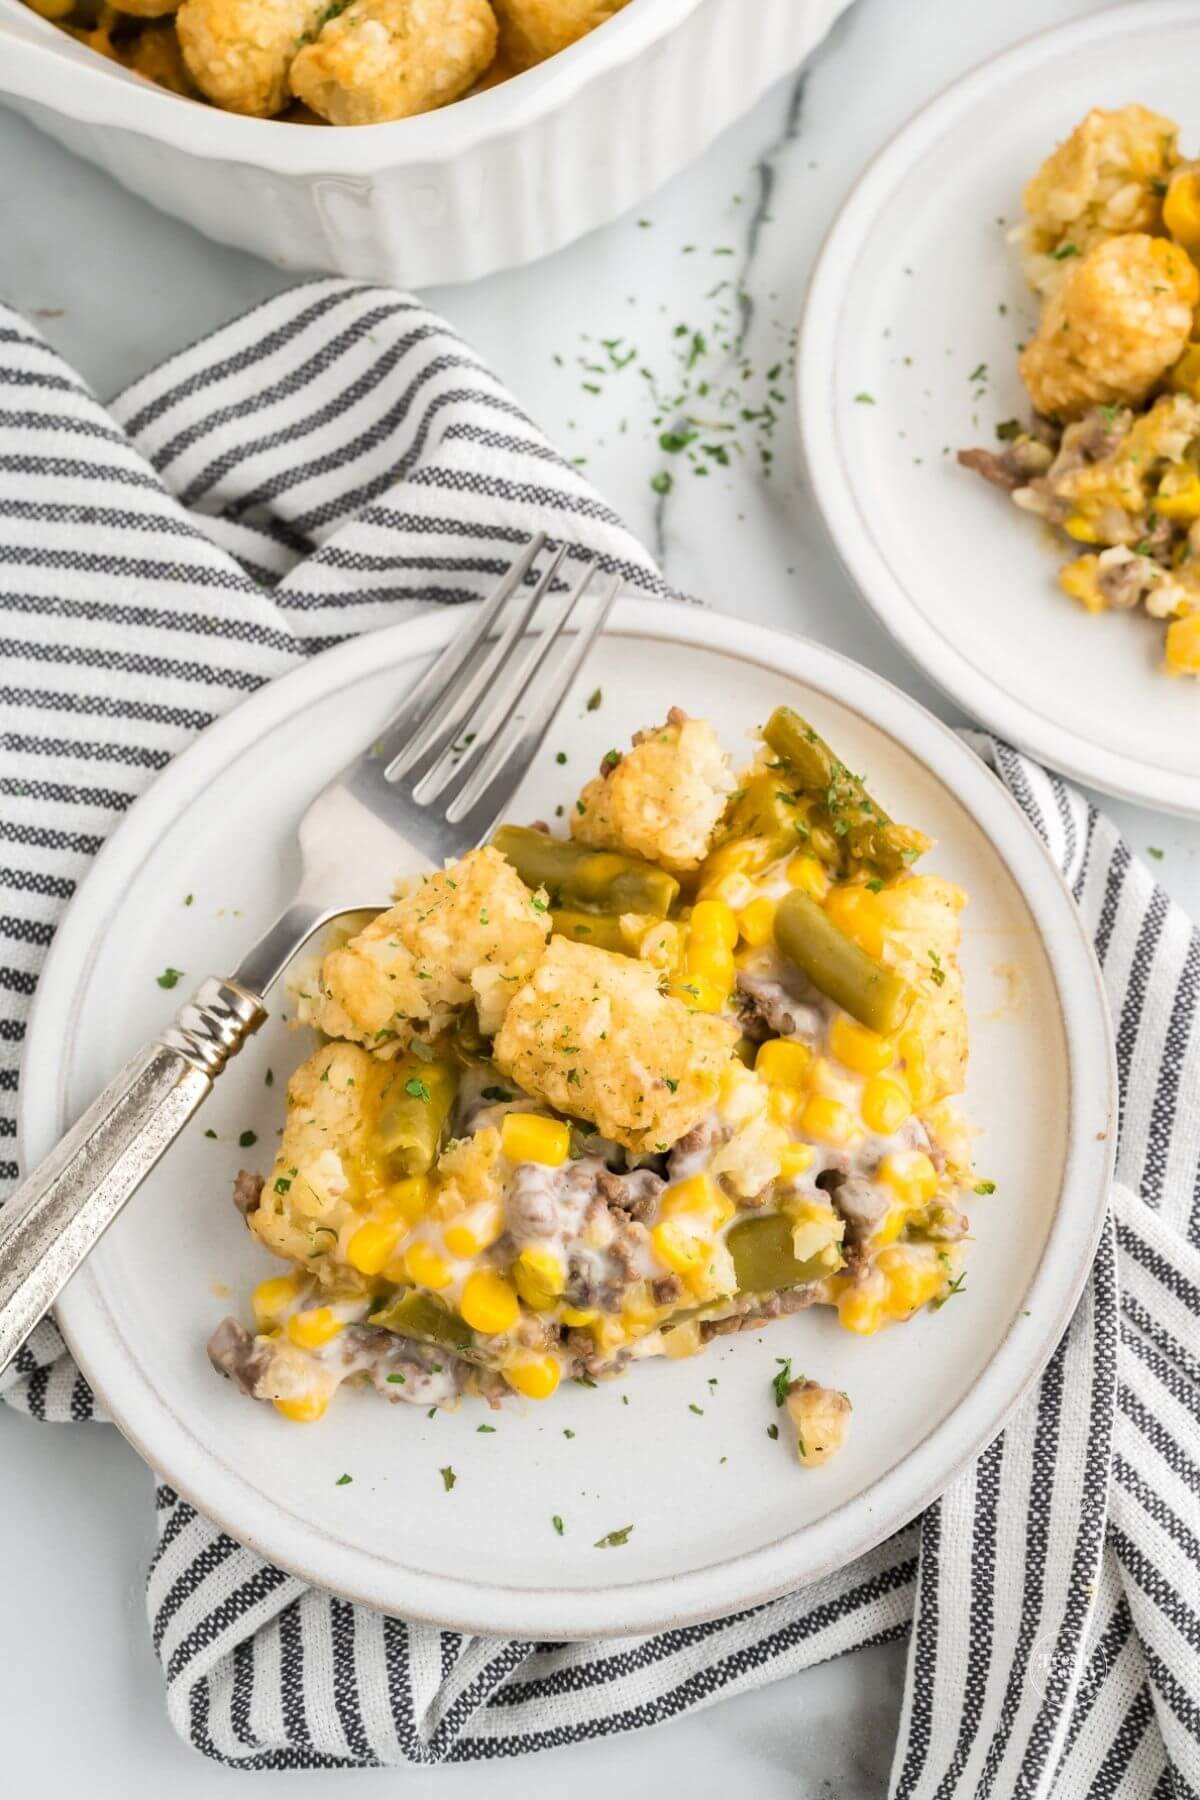 Serving of tater tot casserole on plate with fork.